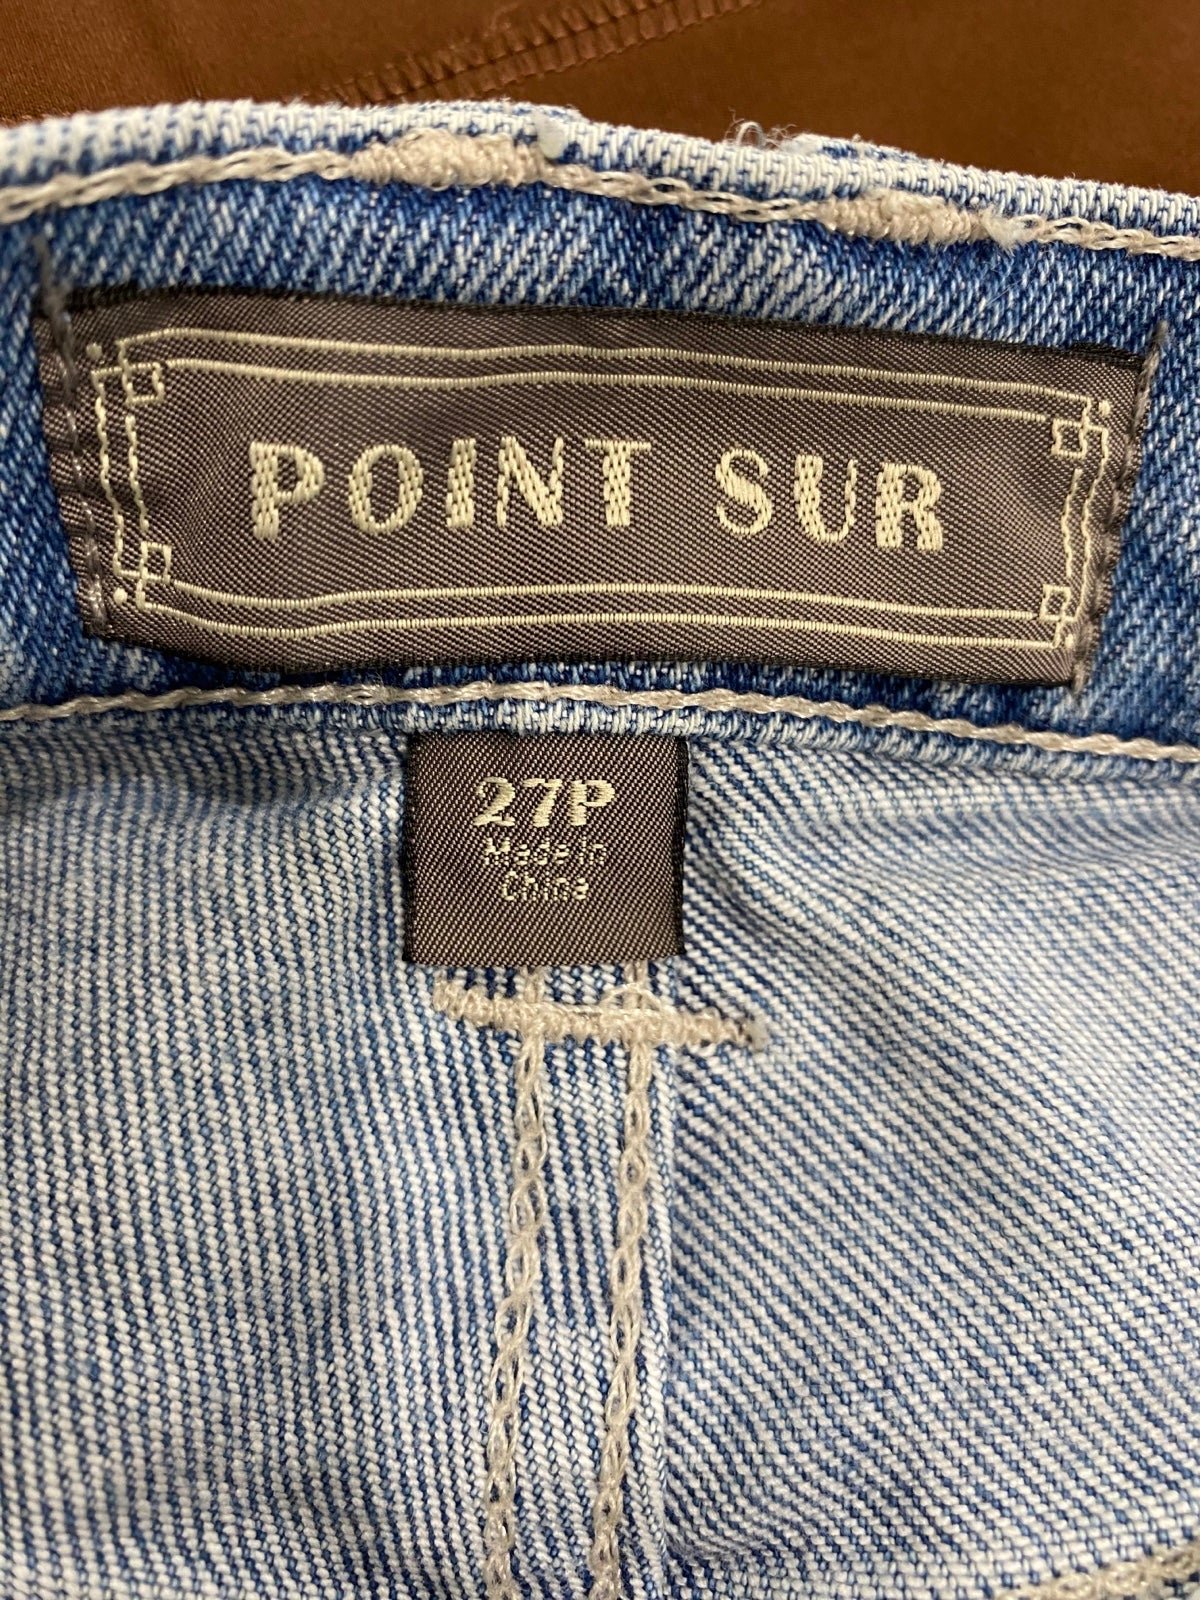 Gorgeous Point Sur kick out crop denim jean OHcrekY38 Buying Cheap